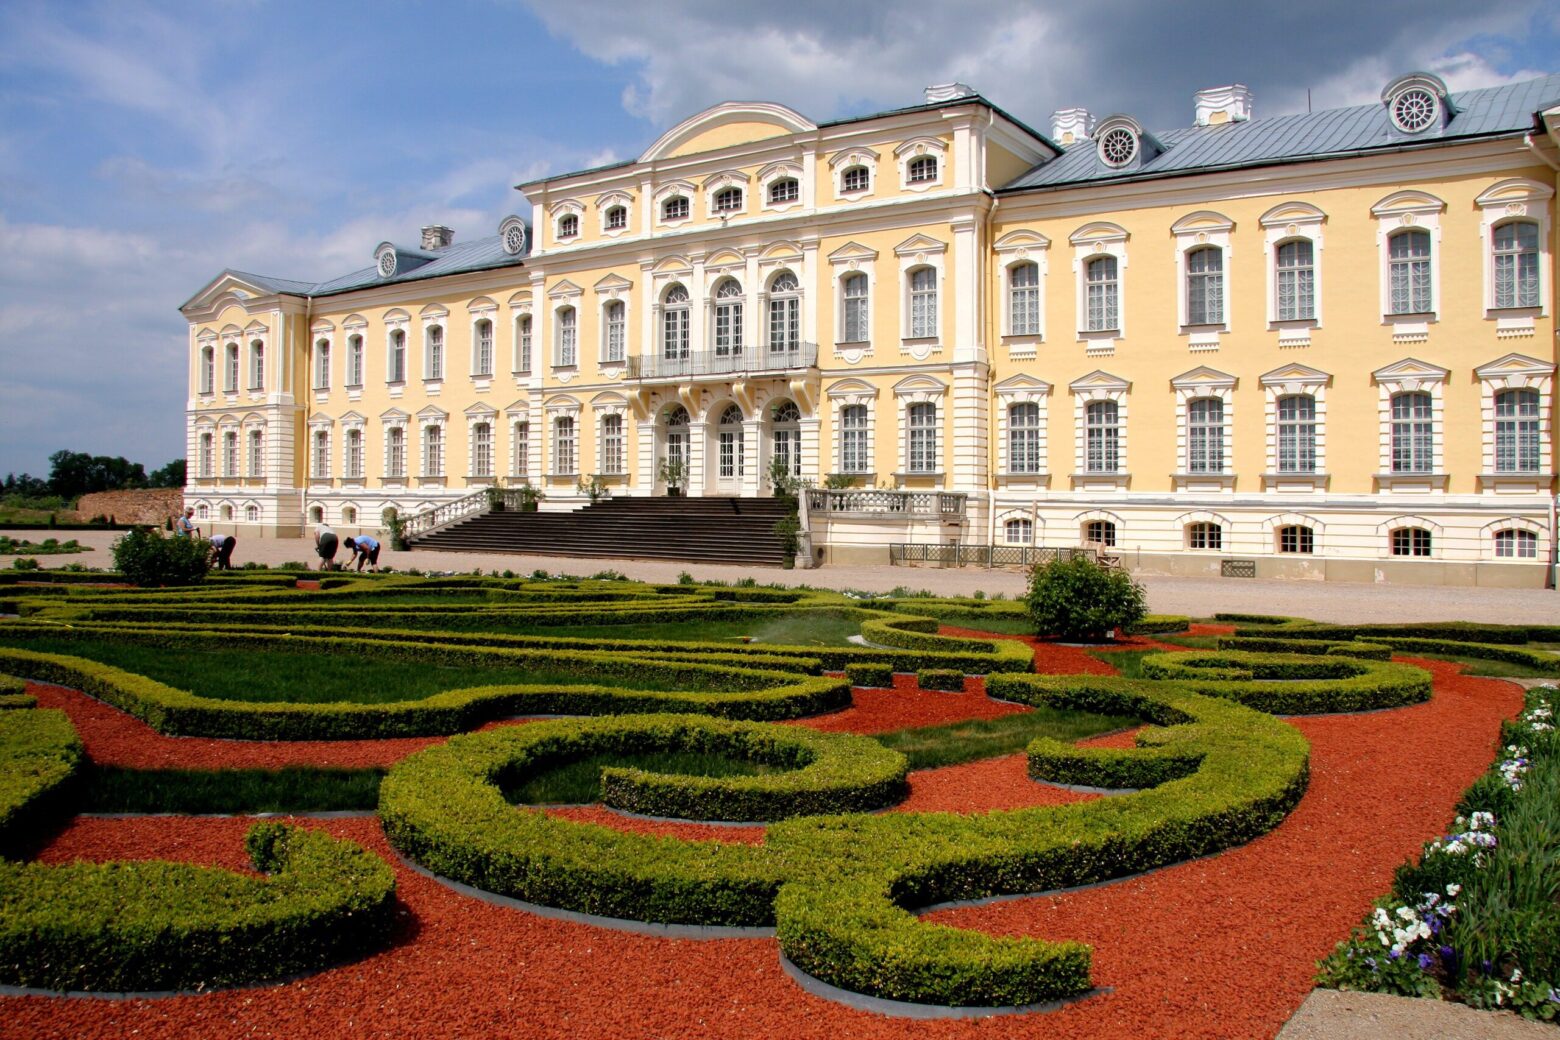 Rundale-palace-and-garden-tour